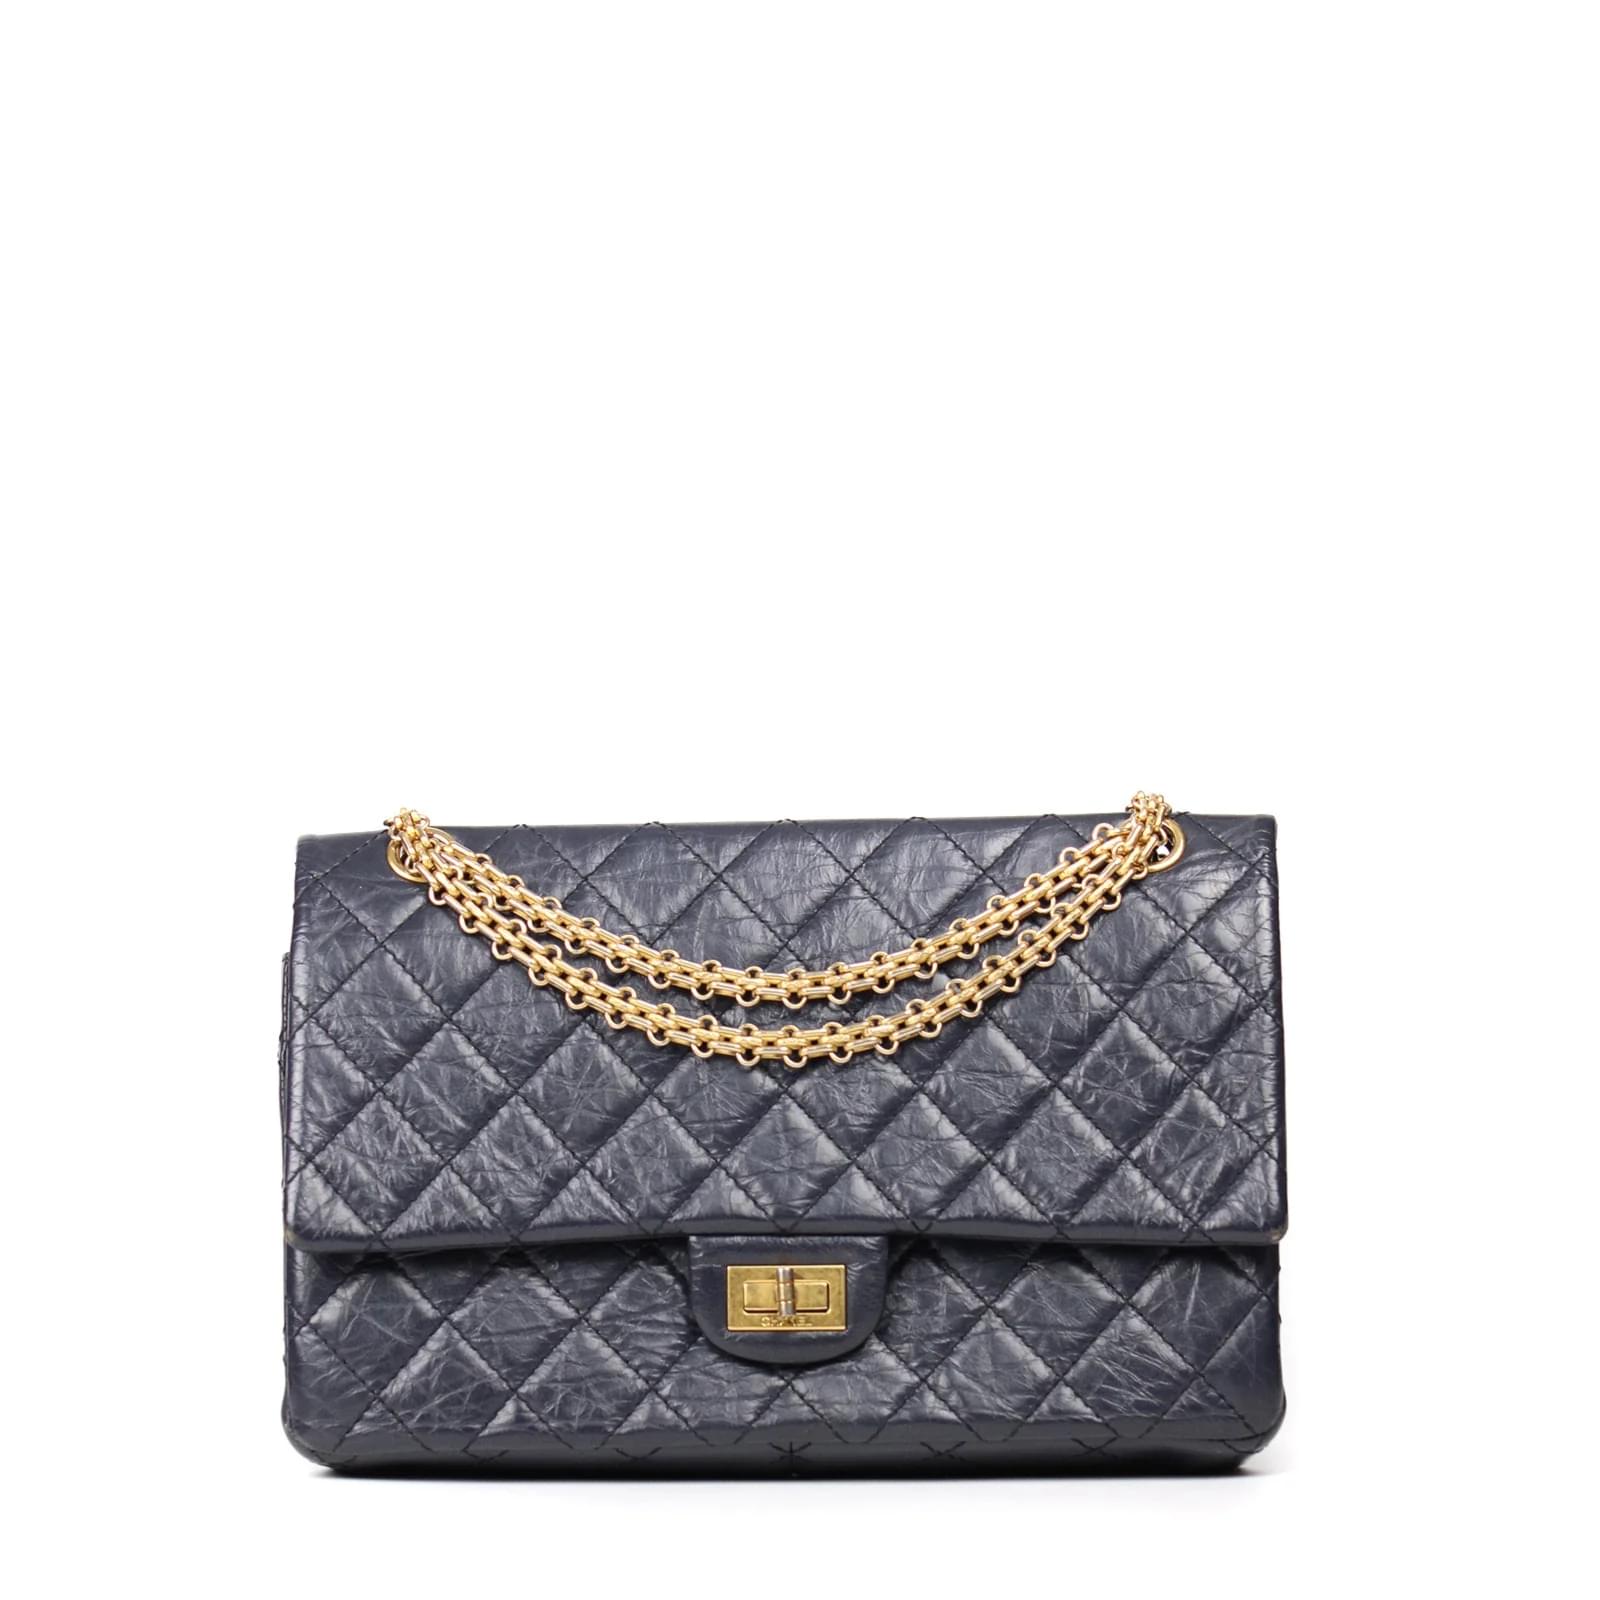 Sold at Auction: A rare Chanel XXL 2.55 bag, Spring-Summer 2010